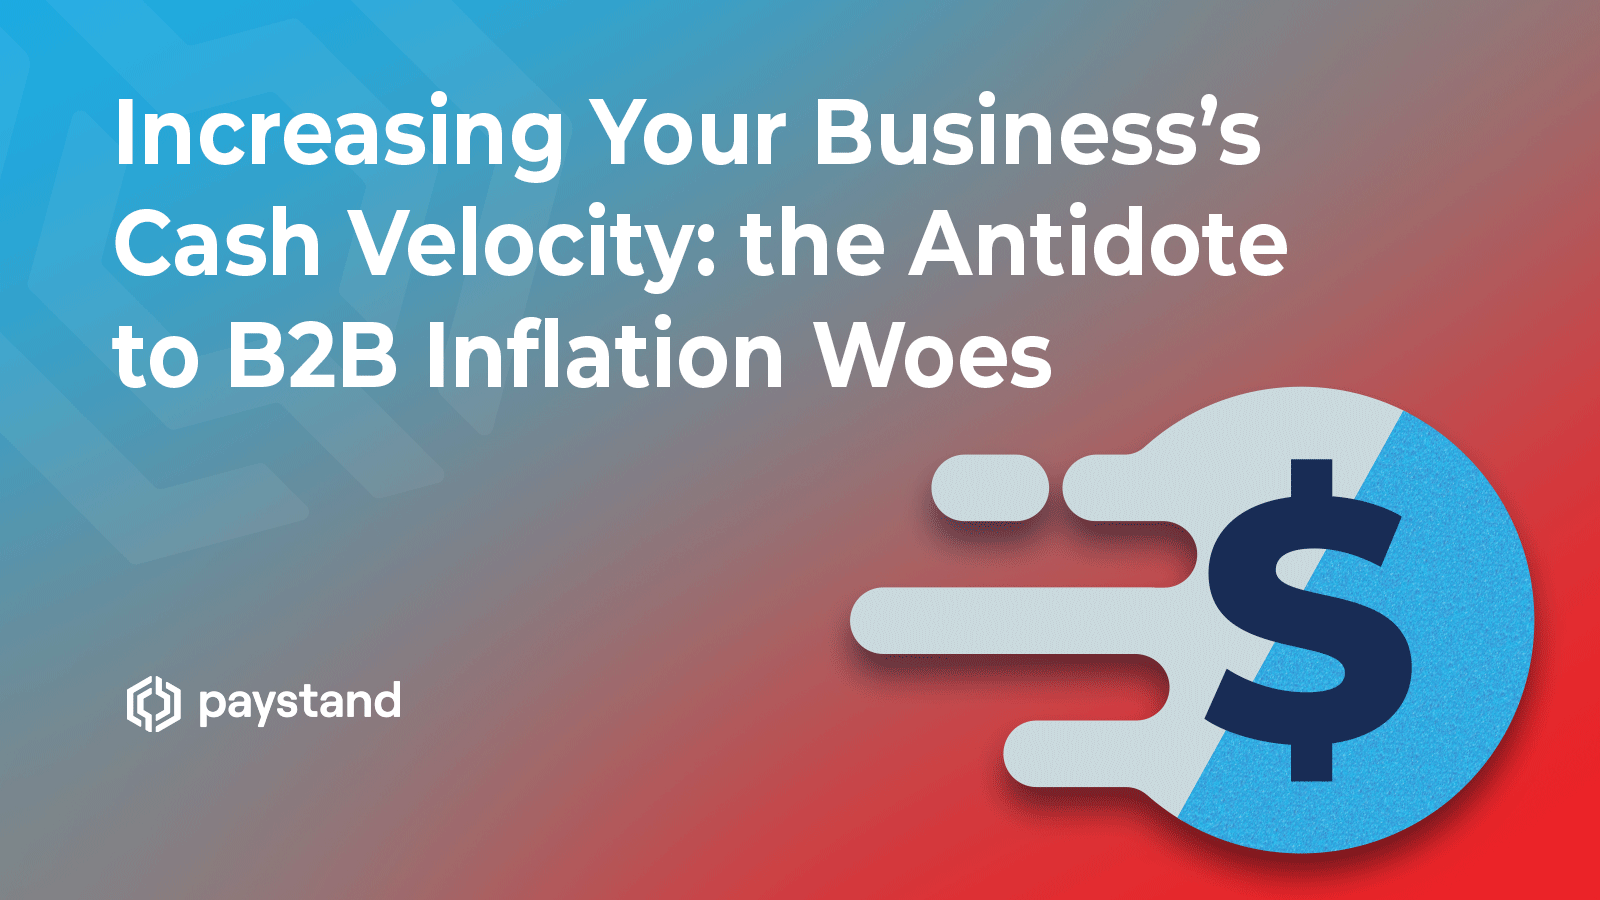 Increasing Your Business’s Cash Velocity: the Antidote to B2B Inflation Woes